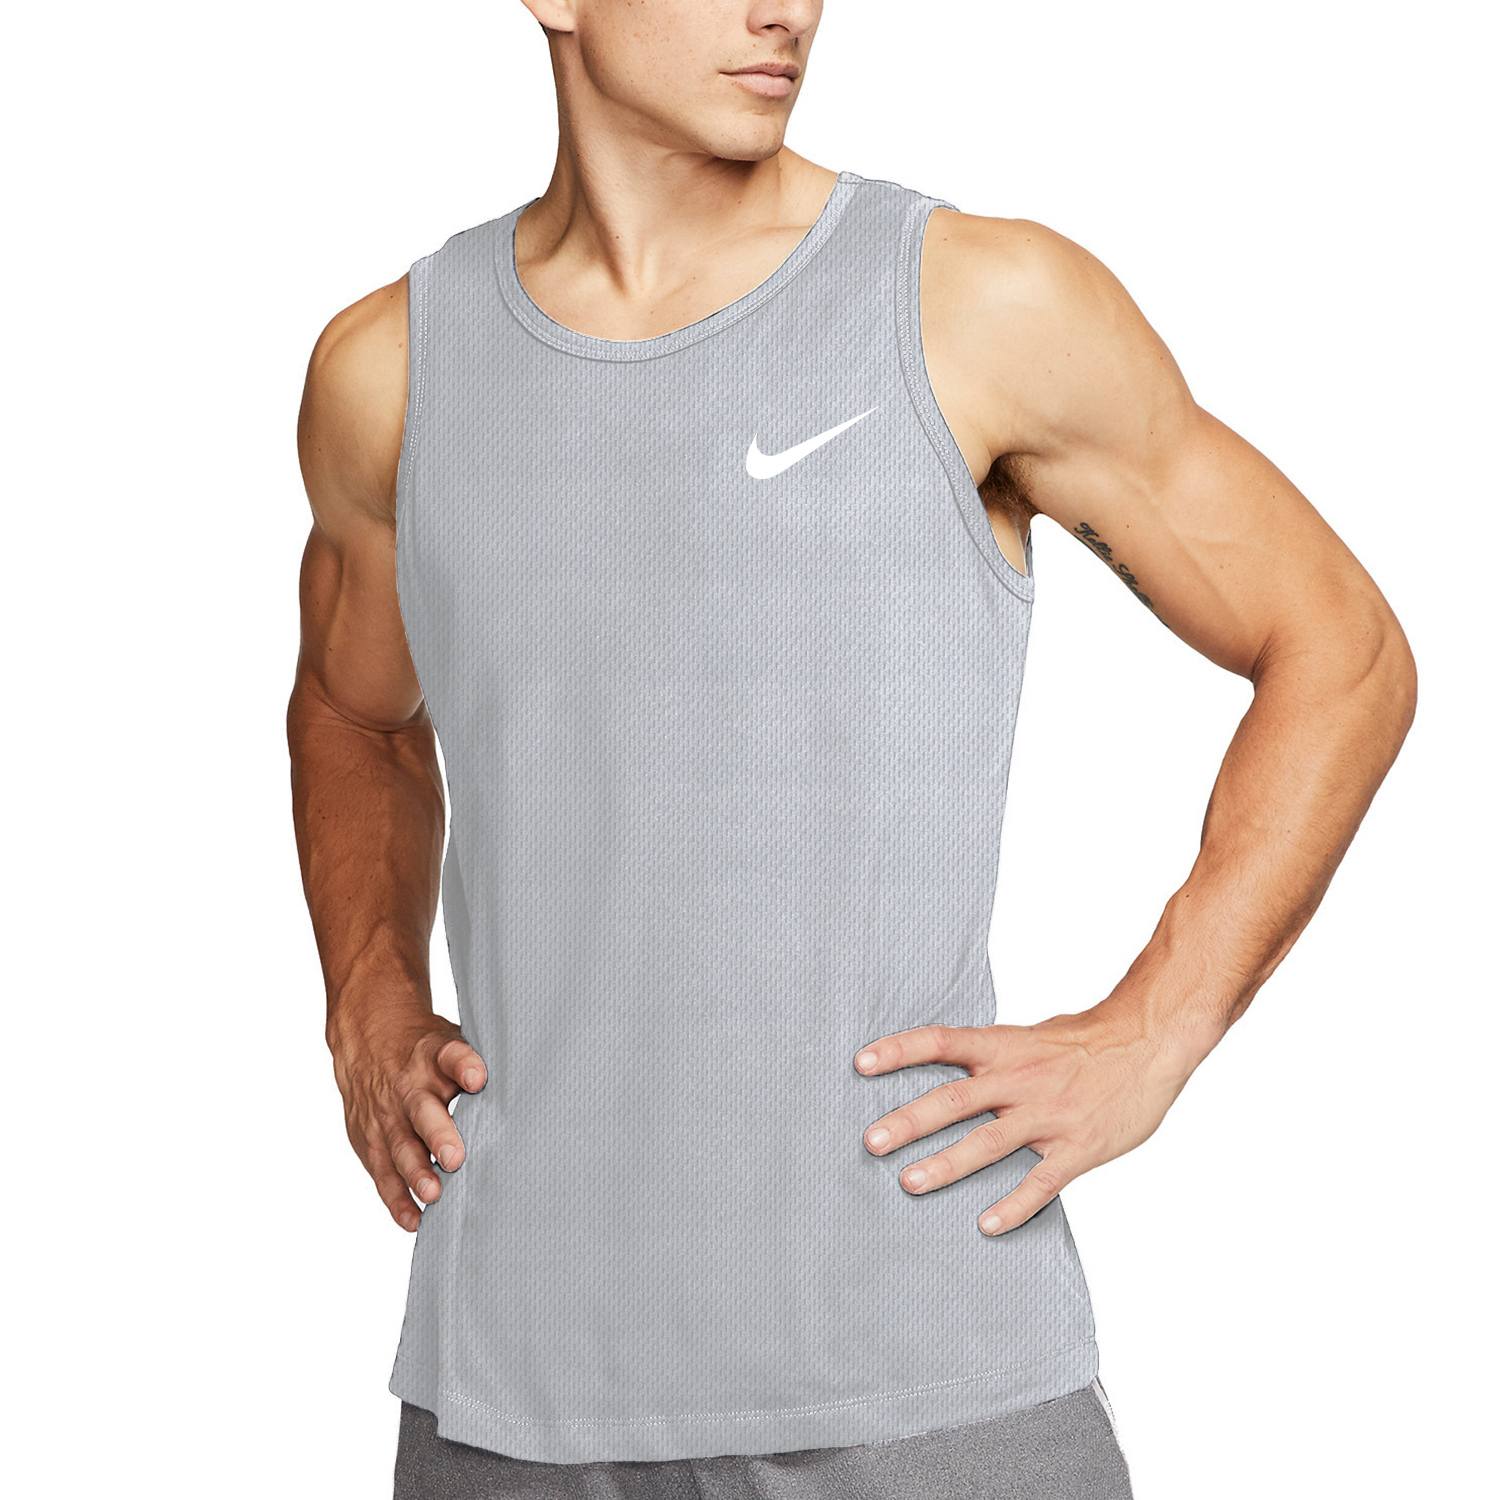 DRIFIT JERSEY SANDO FOR MEN - DSND 1.1 - Fit to sizes small to xxxl ...